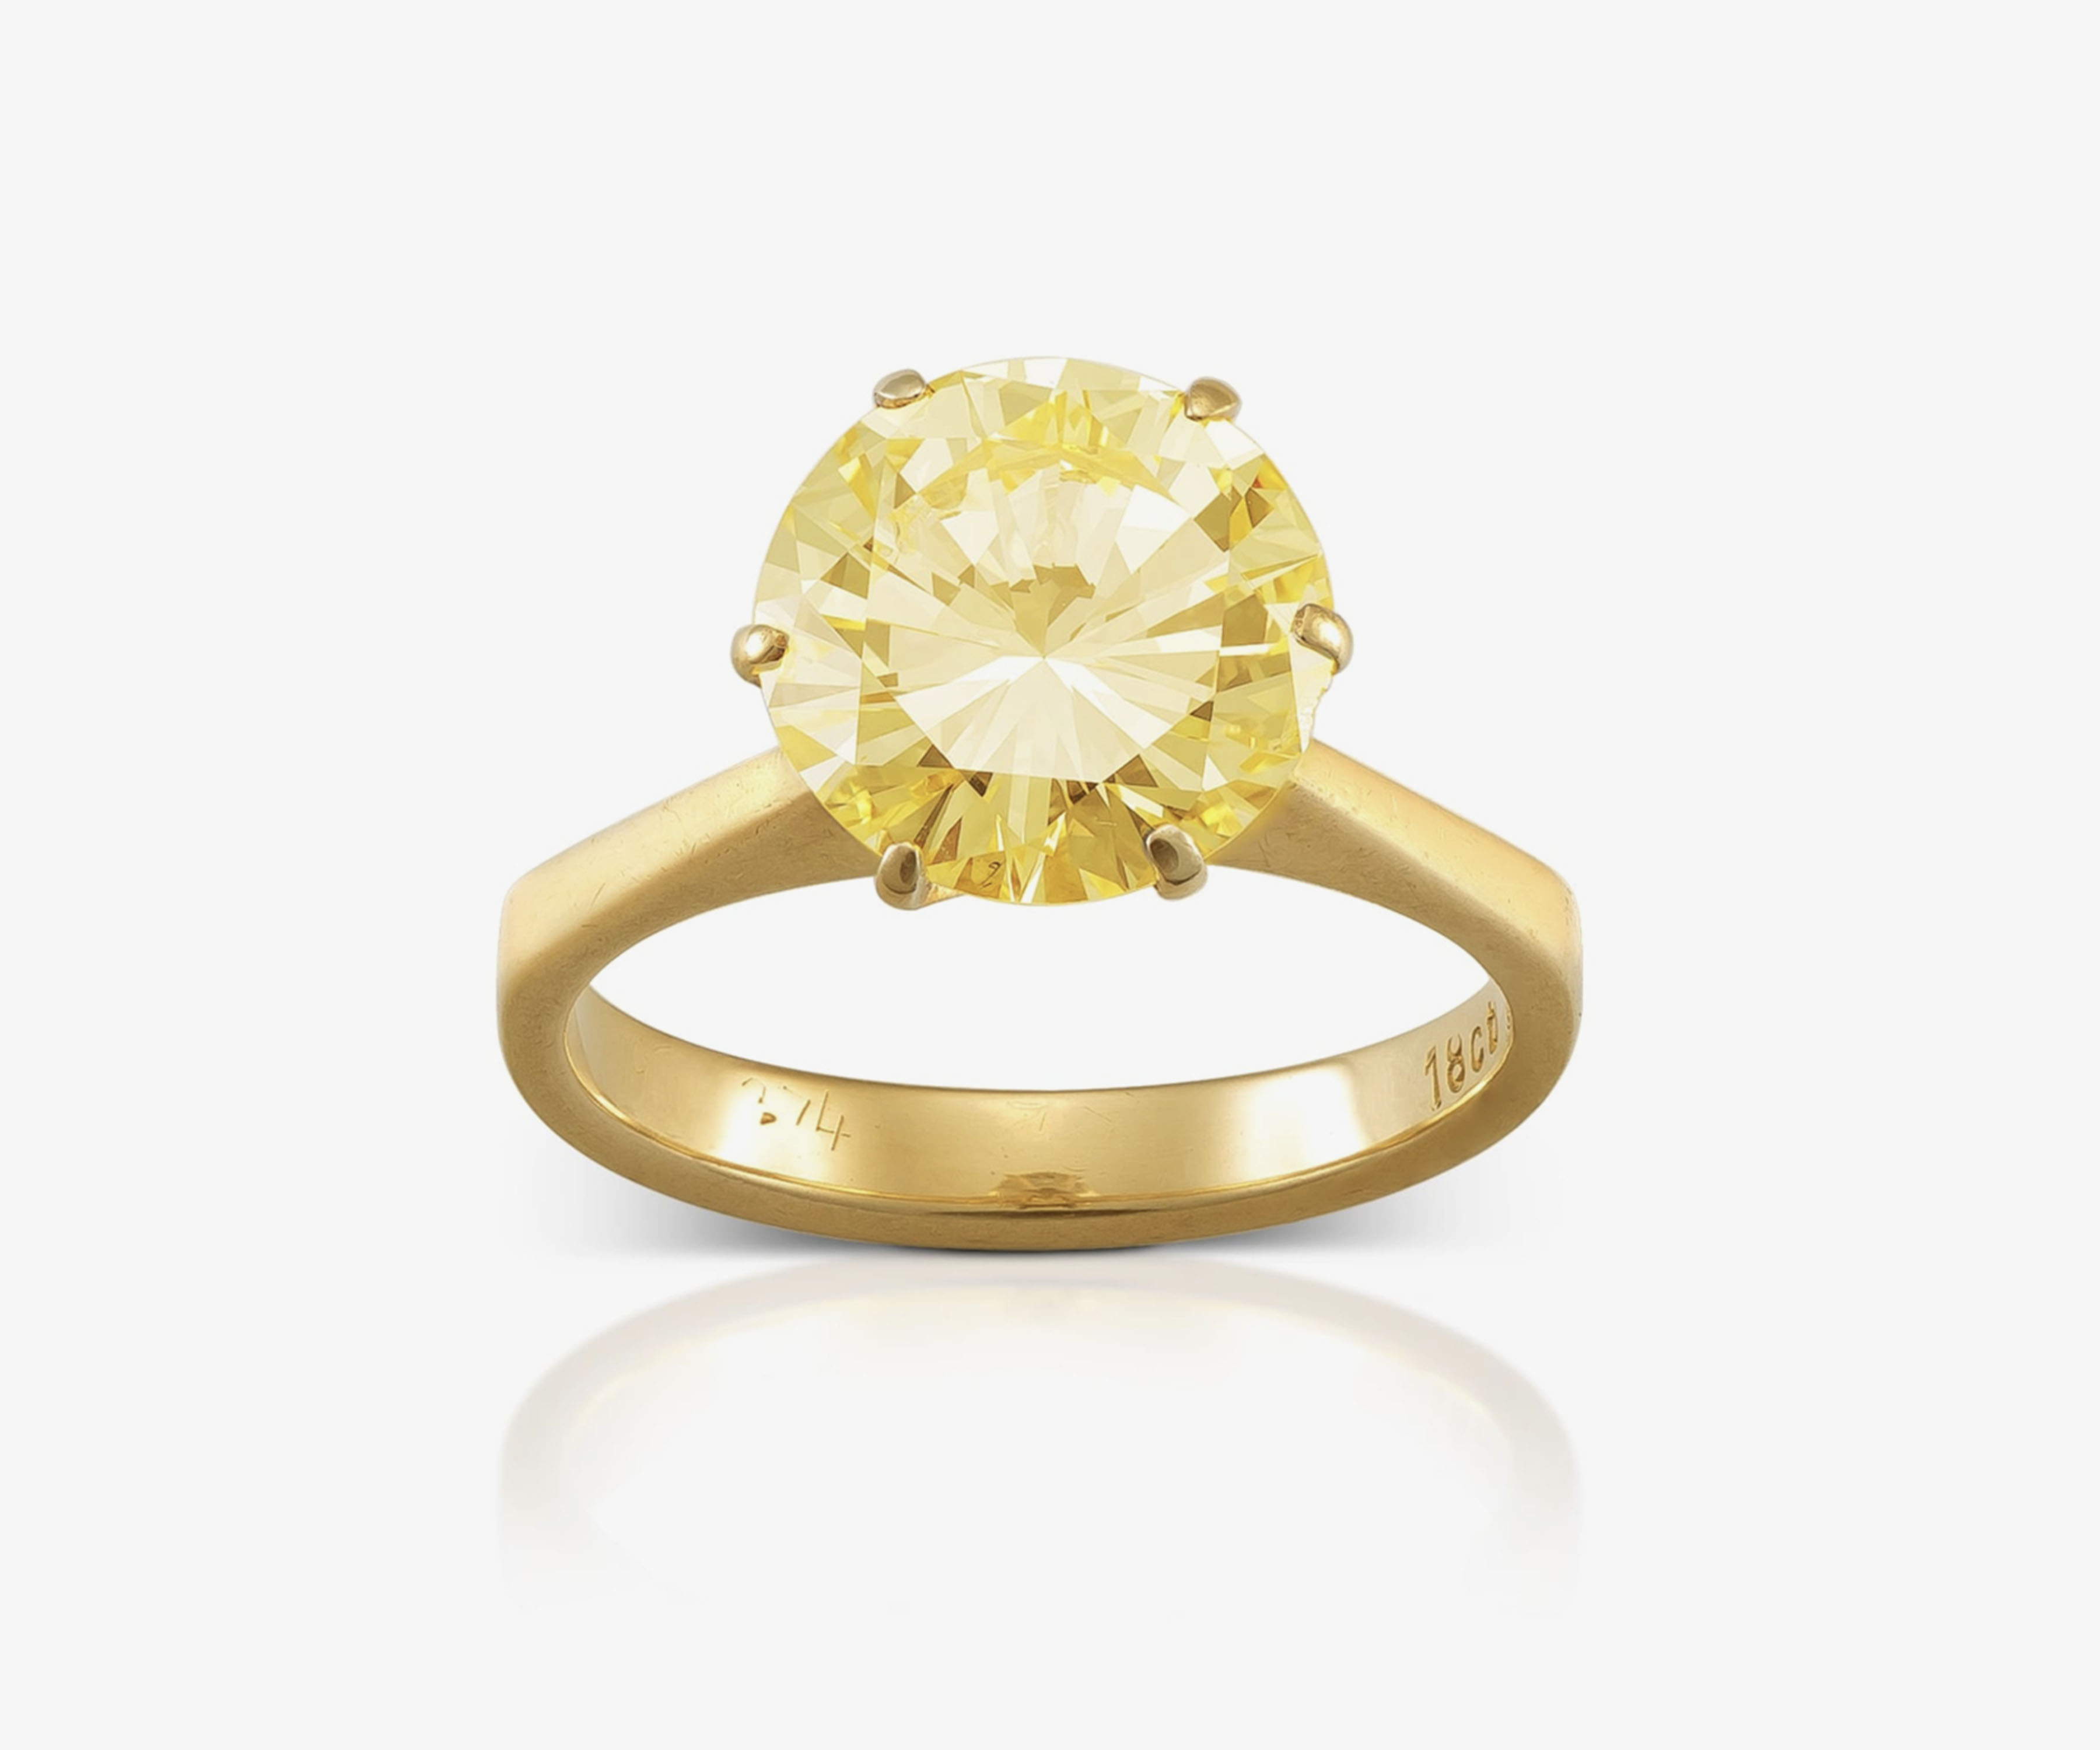 https://stratus.campaign-image.com/images/769069000037658006_zc_v1_1716372690431_fancy_yellow_ring.jpg